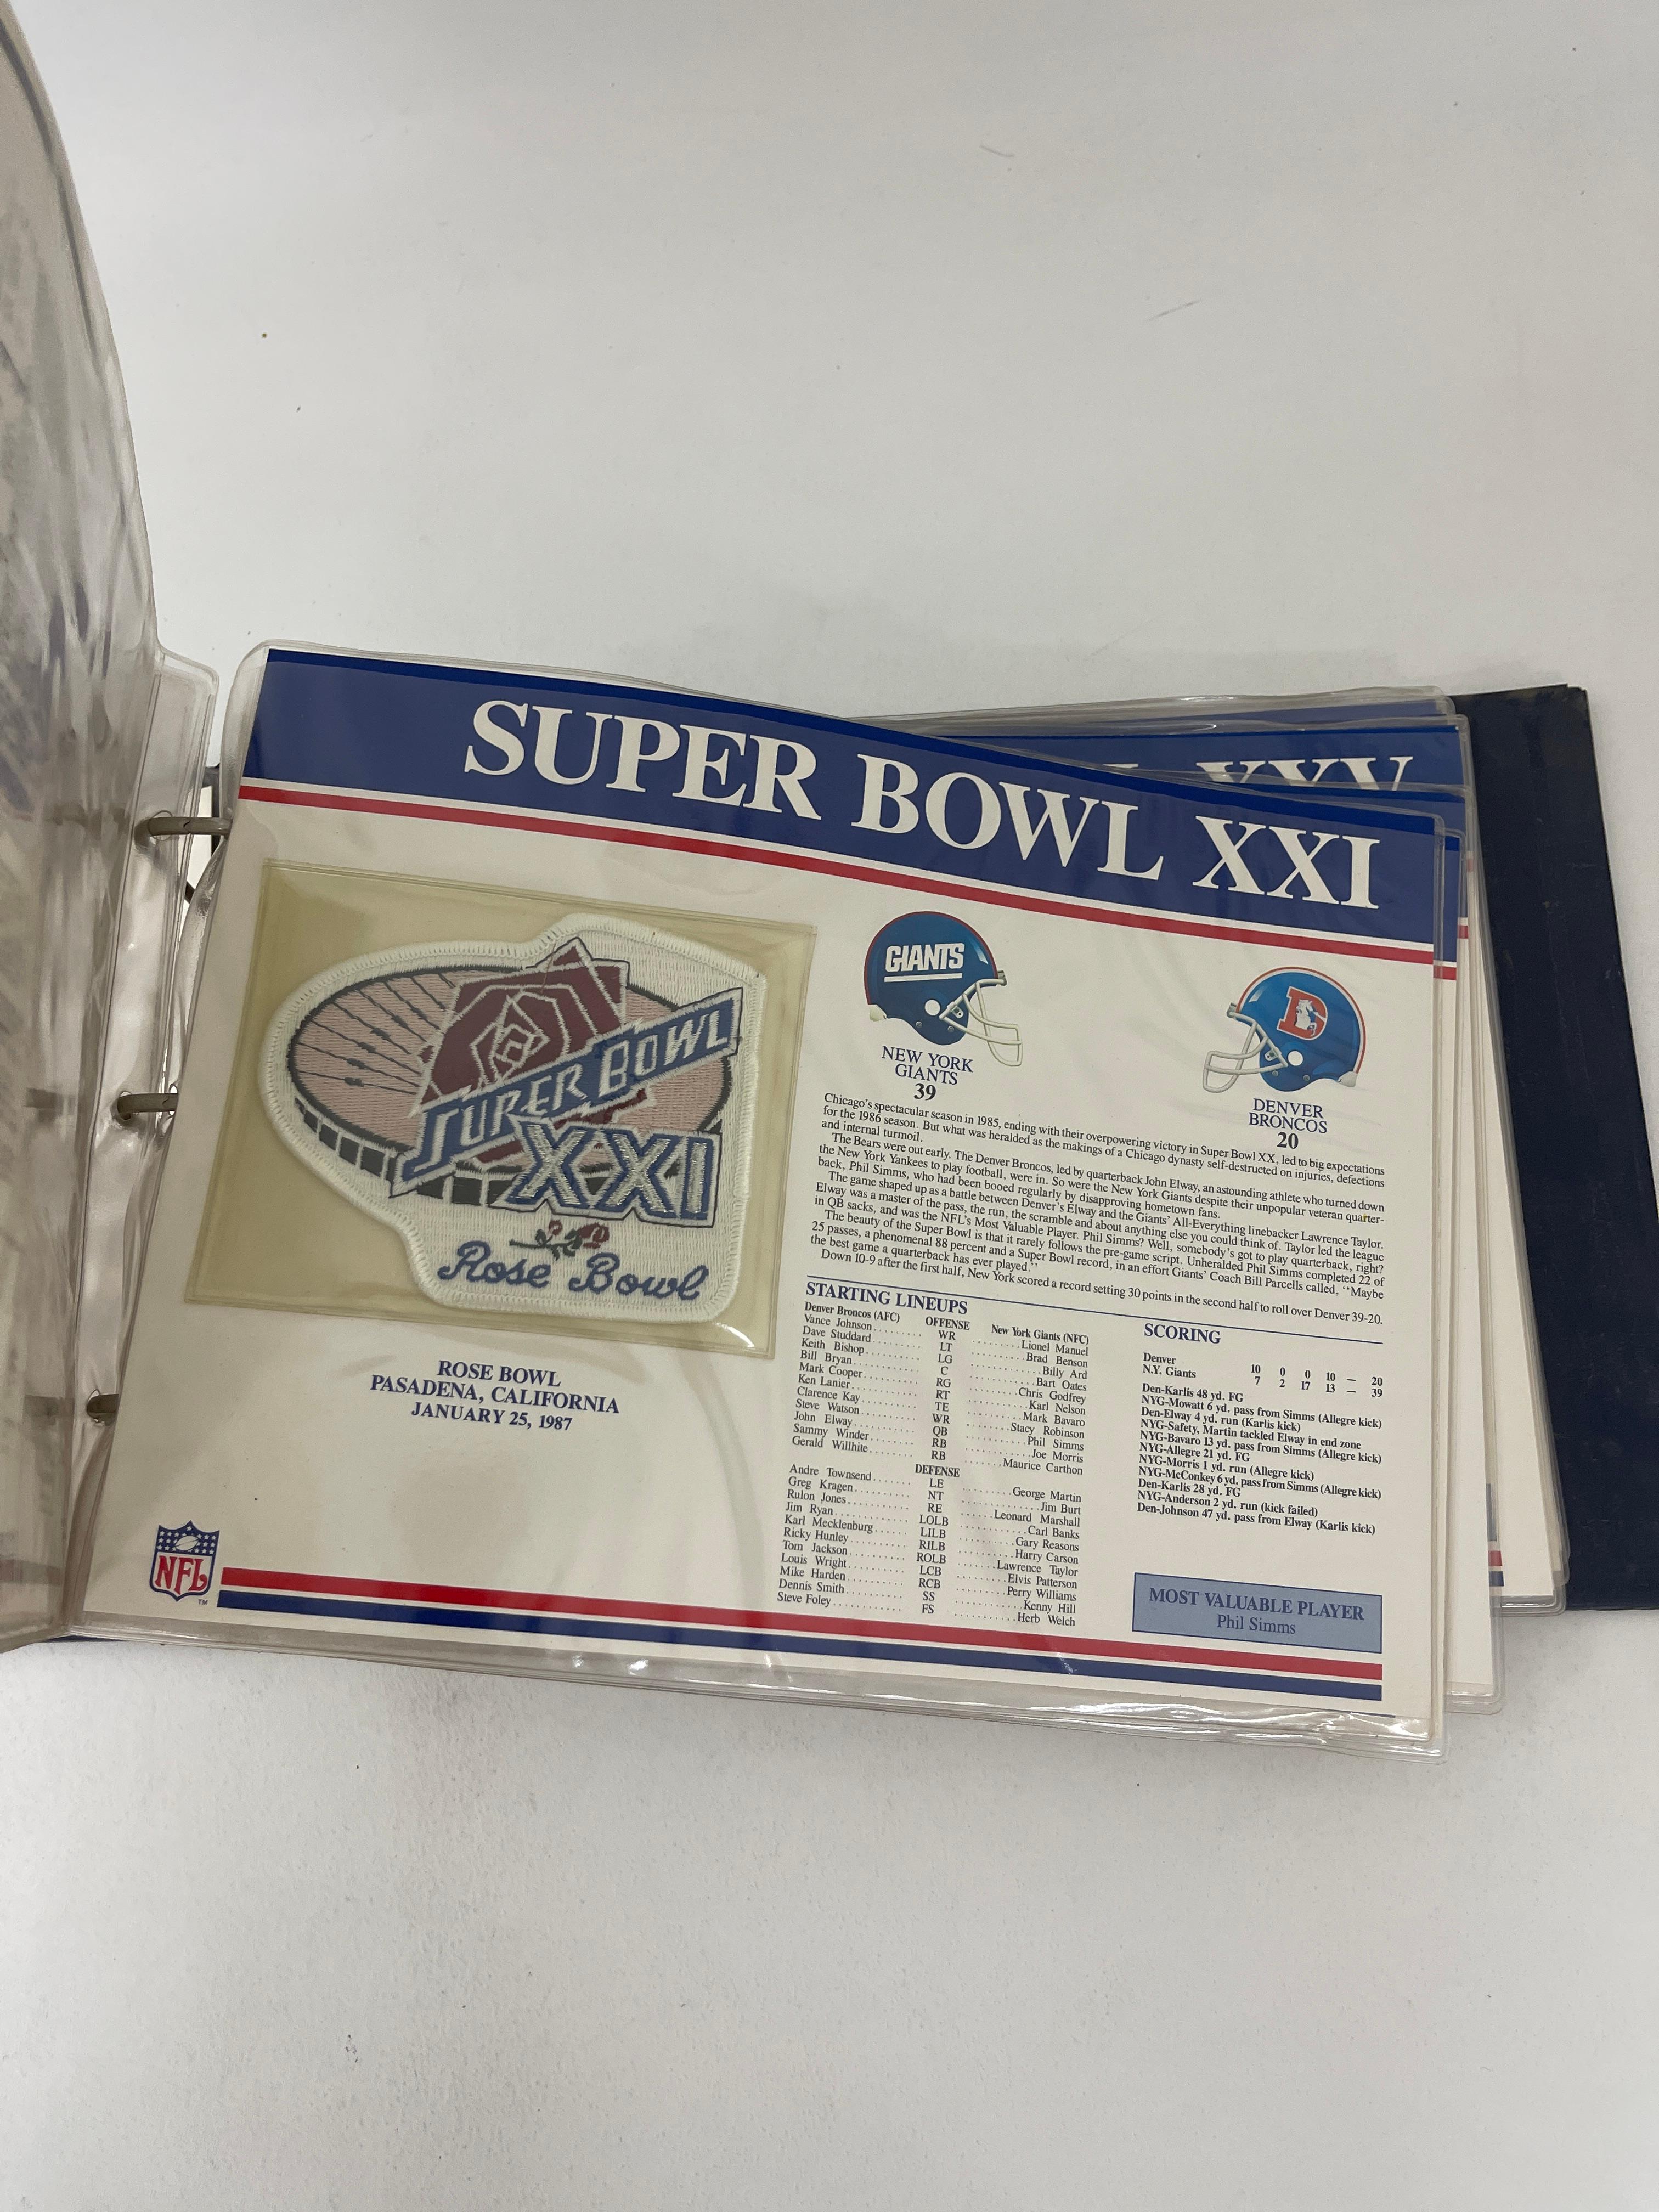 The Official NFL Super Bowl Patch Collection Binder